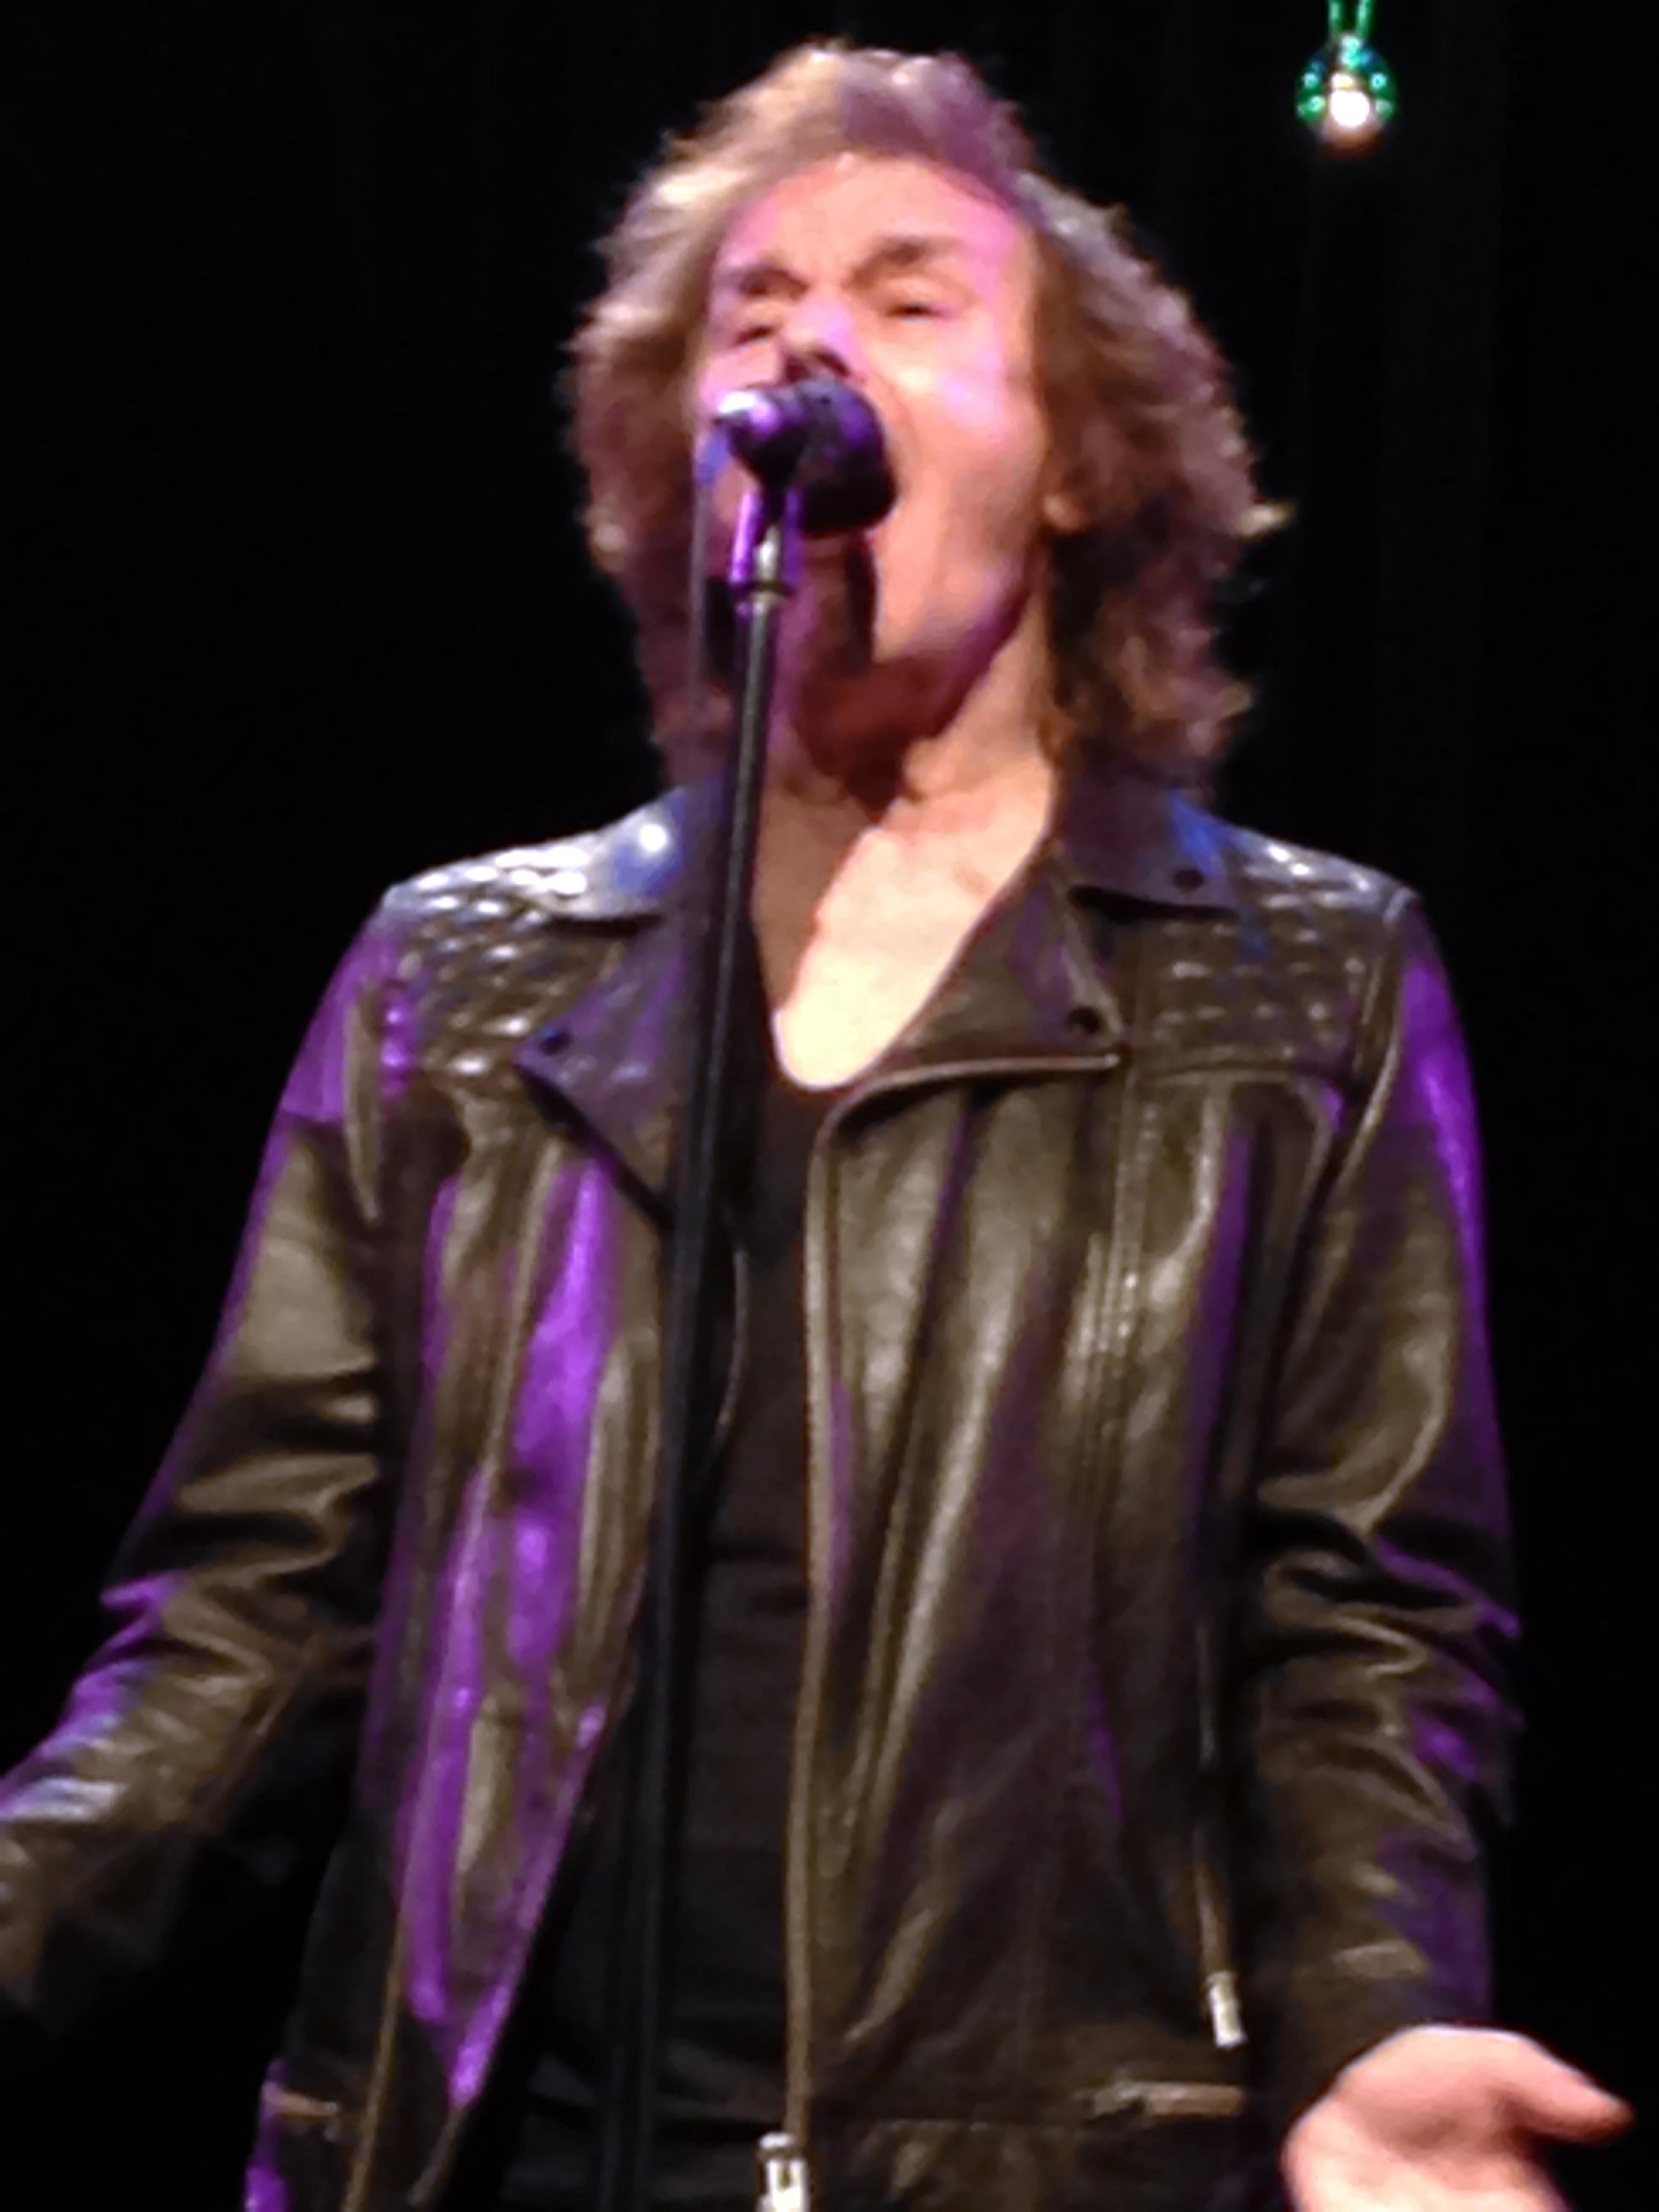 The Zombies vocalist Colin Blunstone